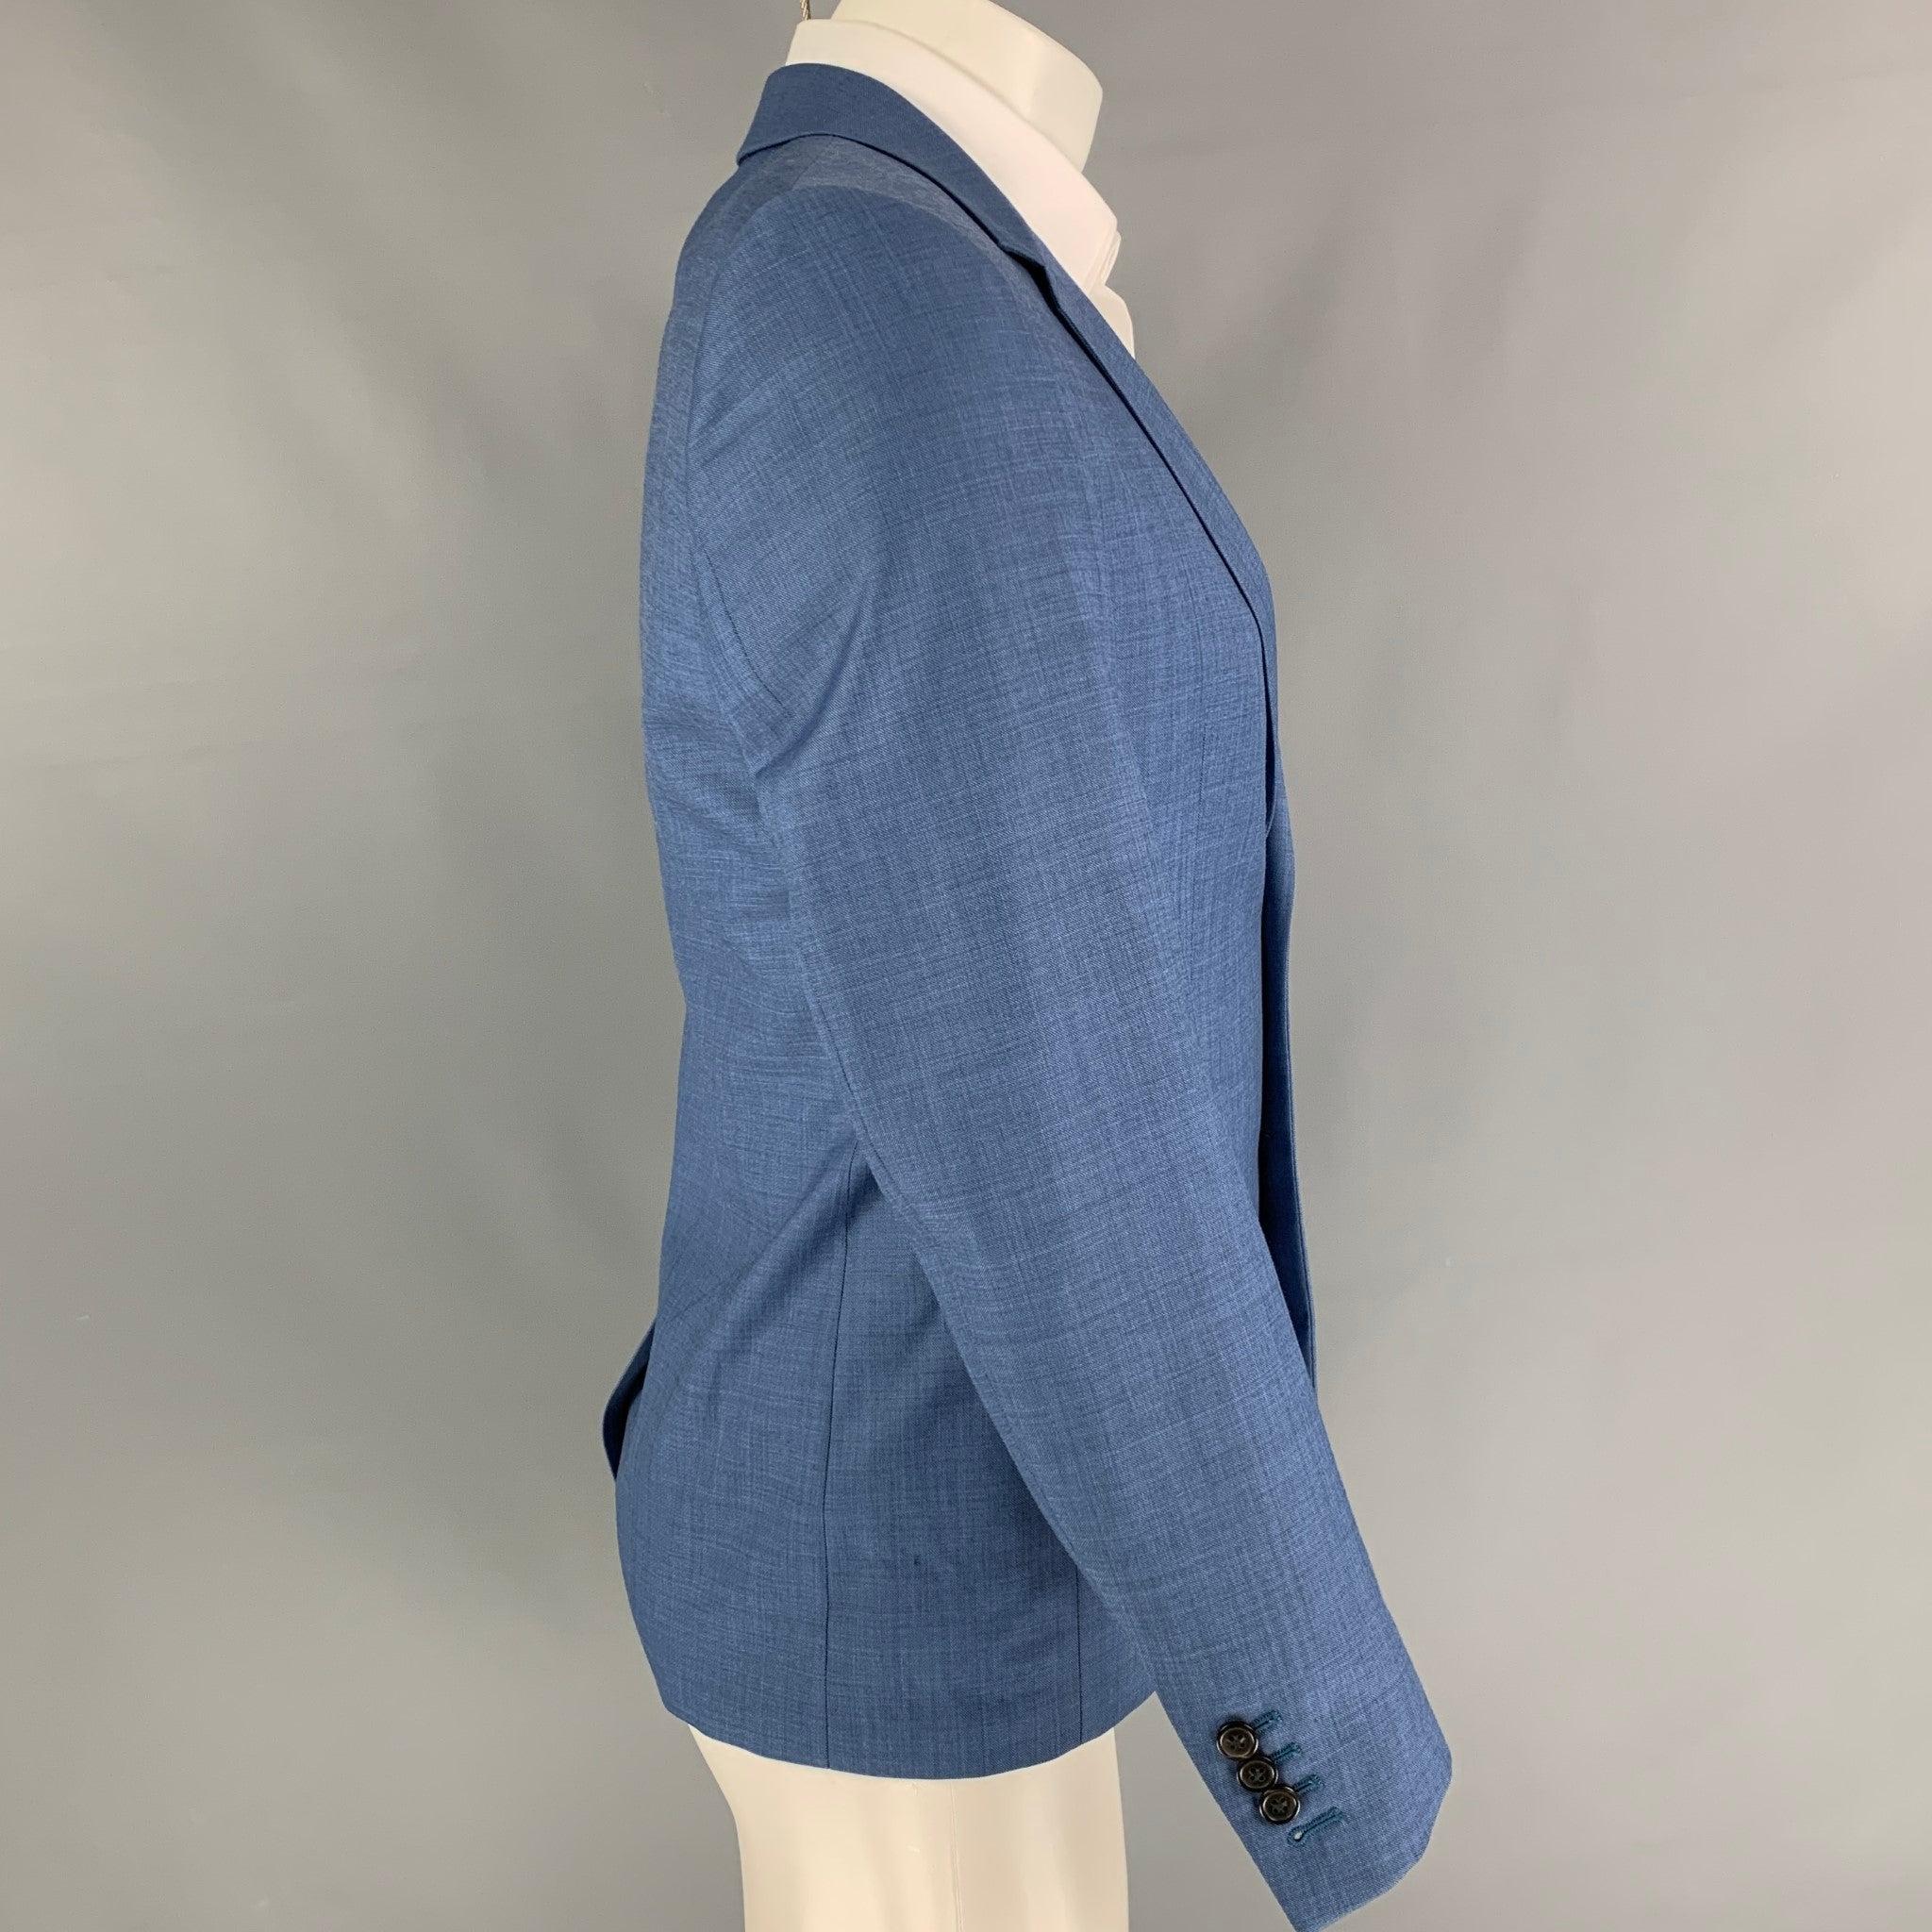 THE KOOPLES Chest Size 36 Blue Wool Notch Lapel Sport Coat In Good Condition For Sale In San Francisco, CA